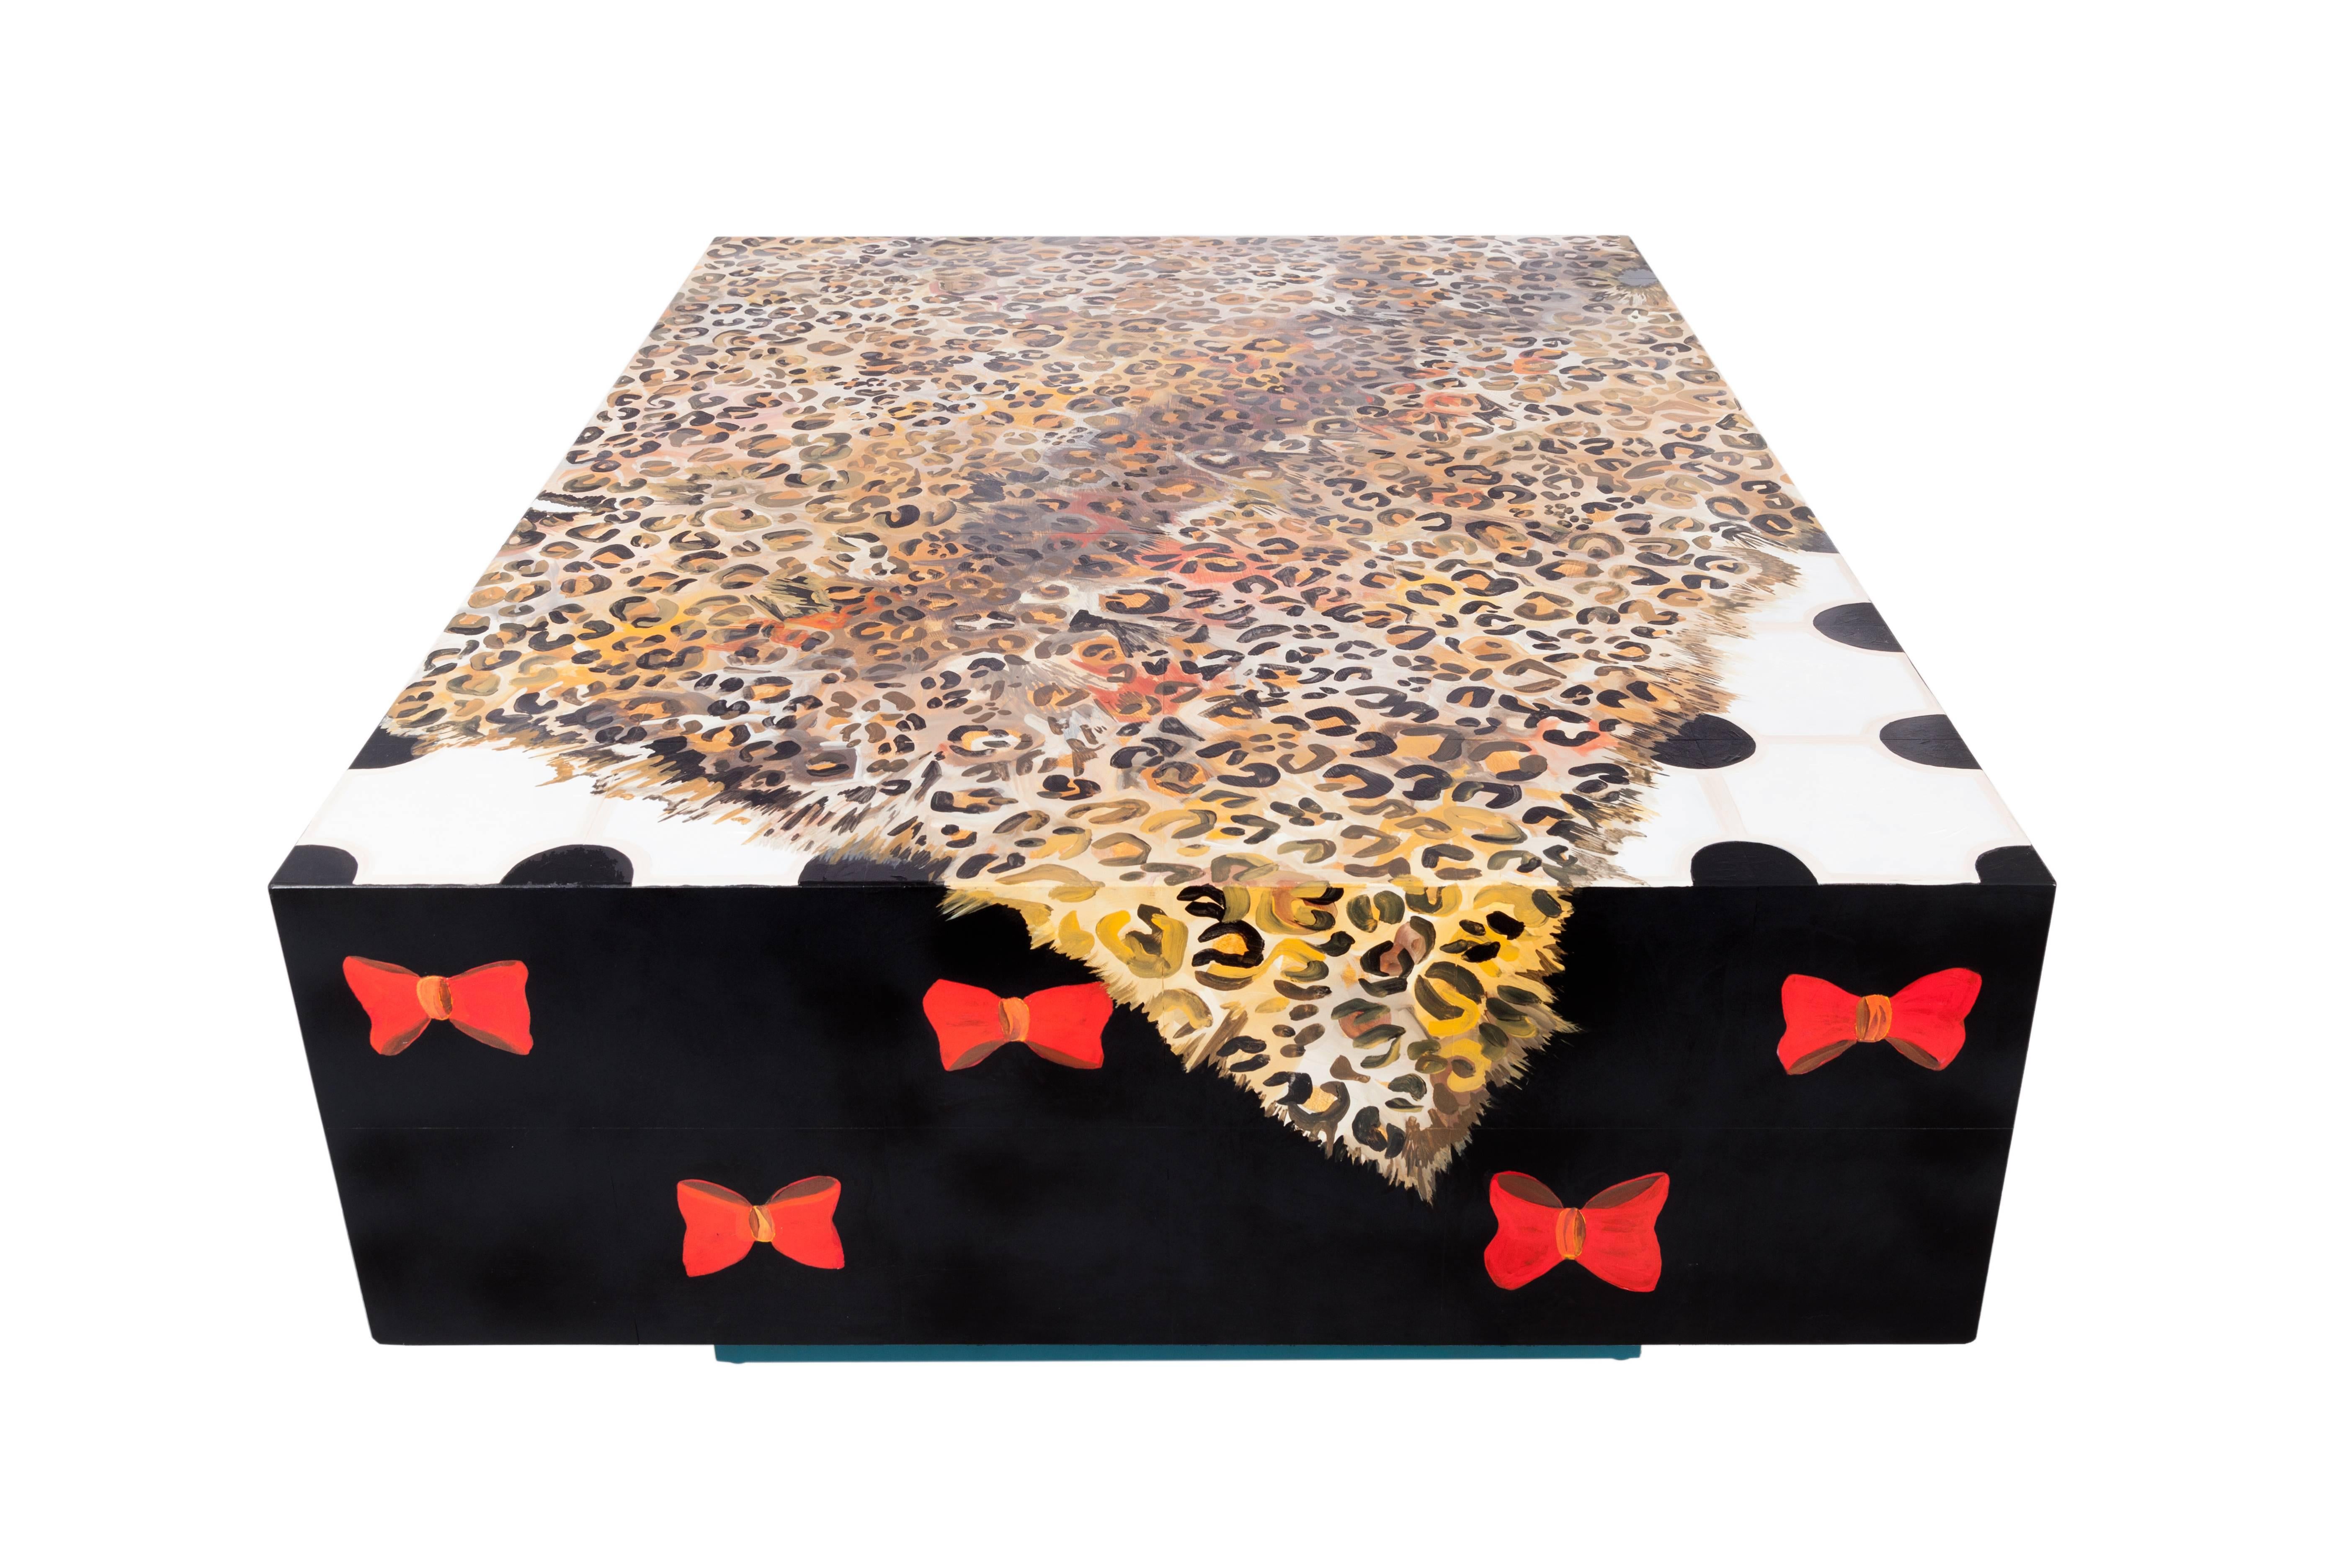 Wood Artist Edition Hand-Painted Coffee Table For Sale